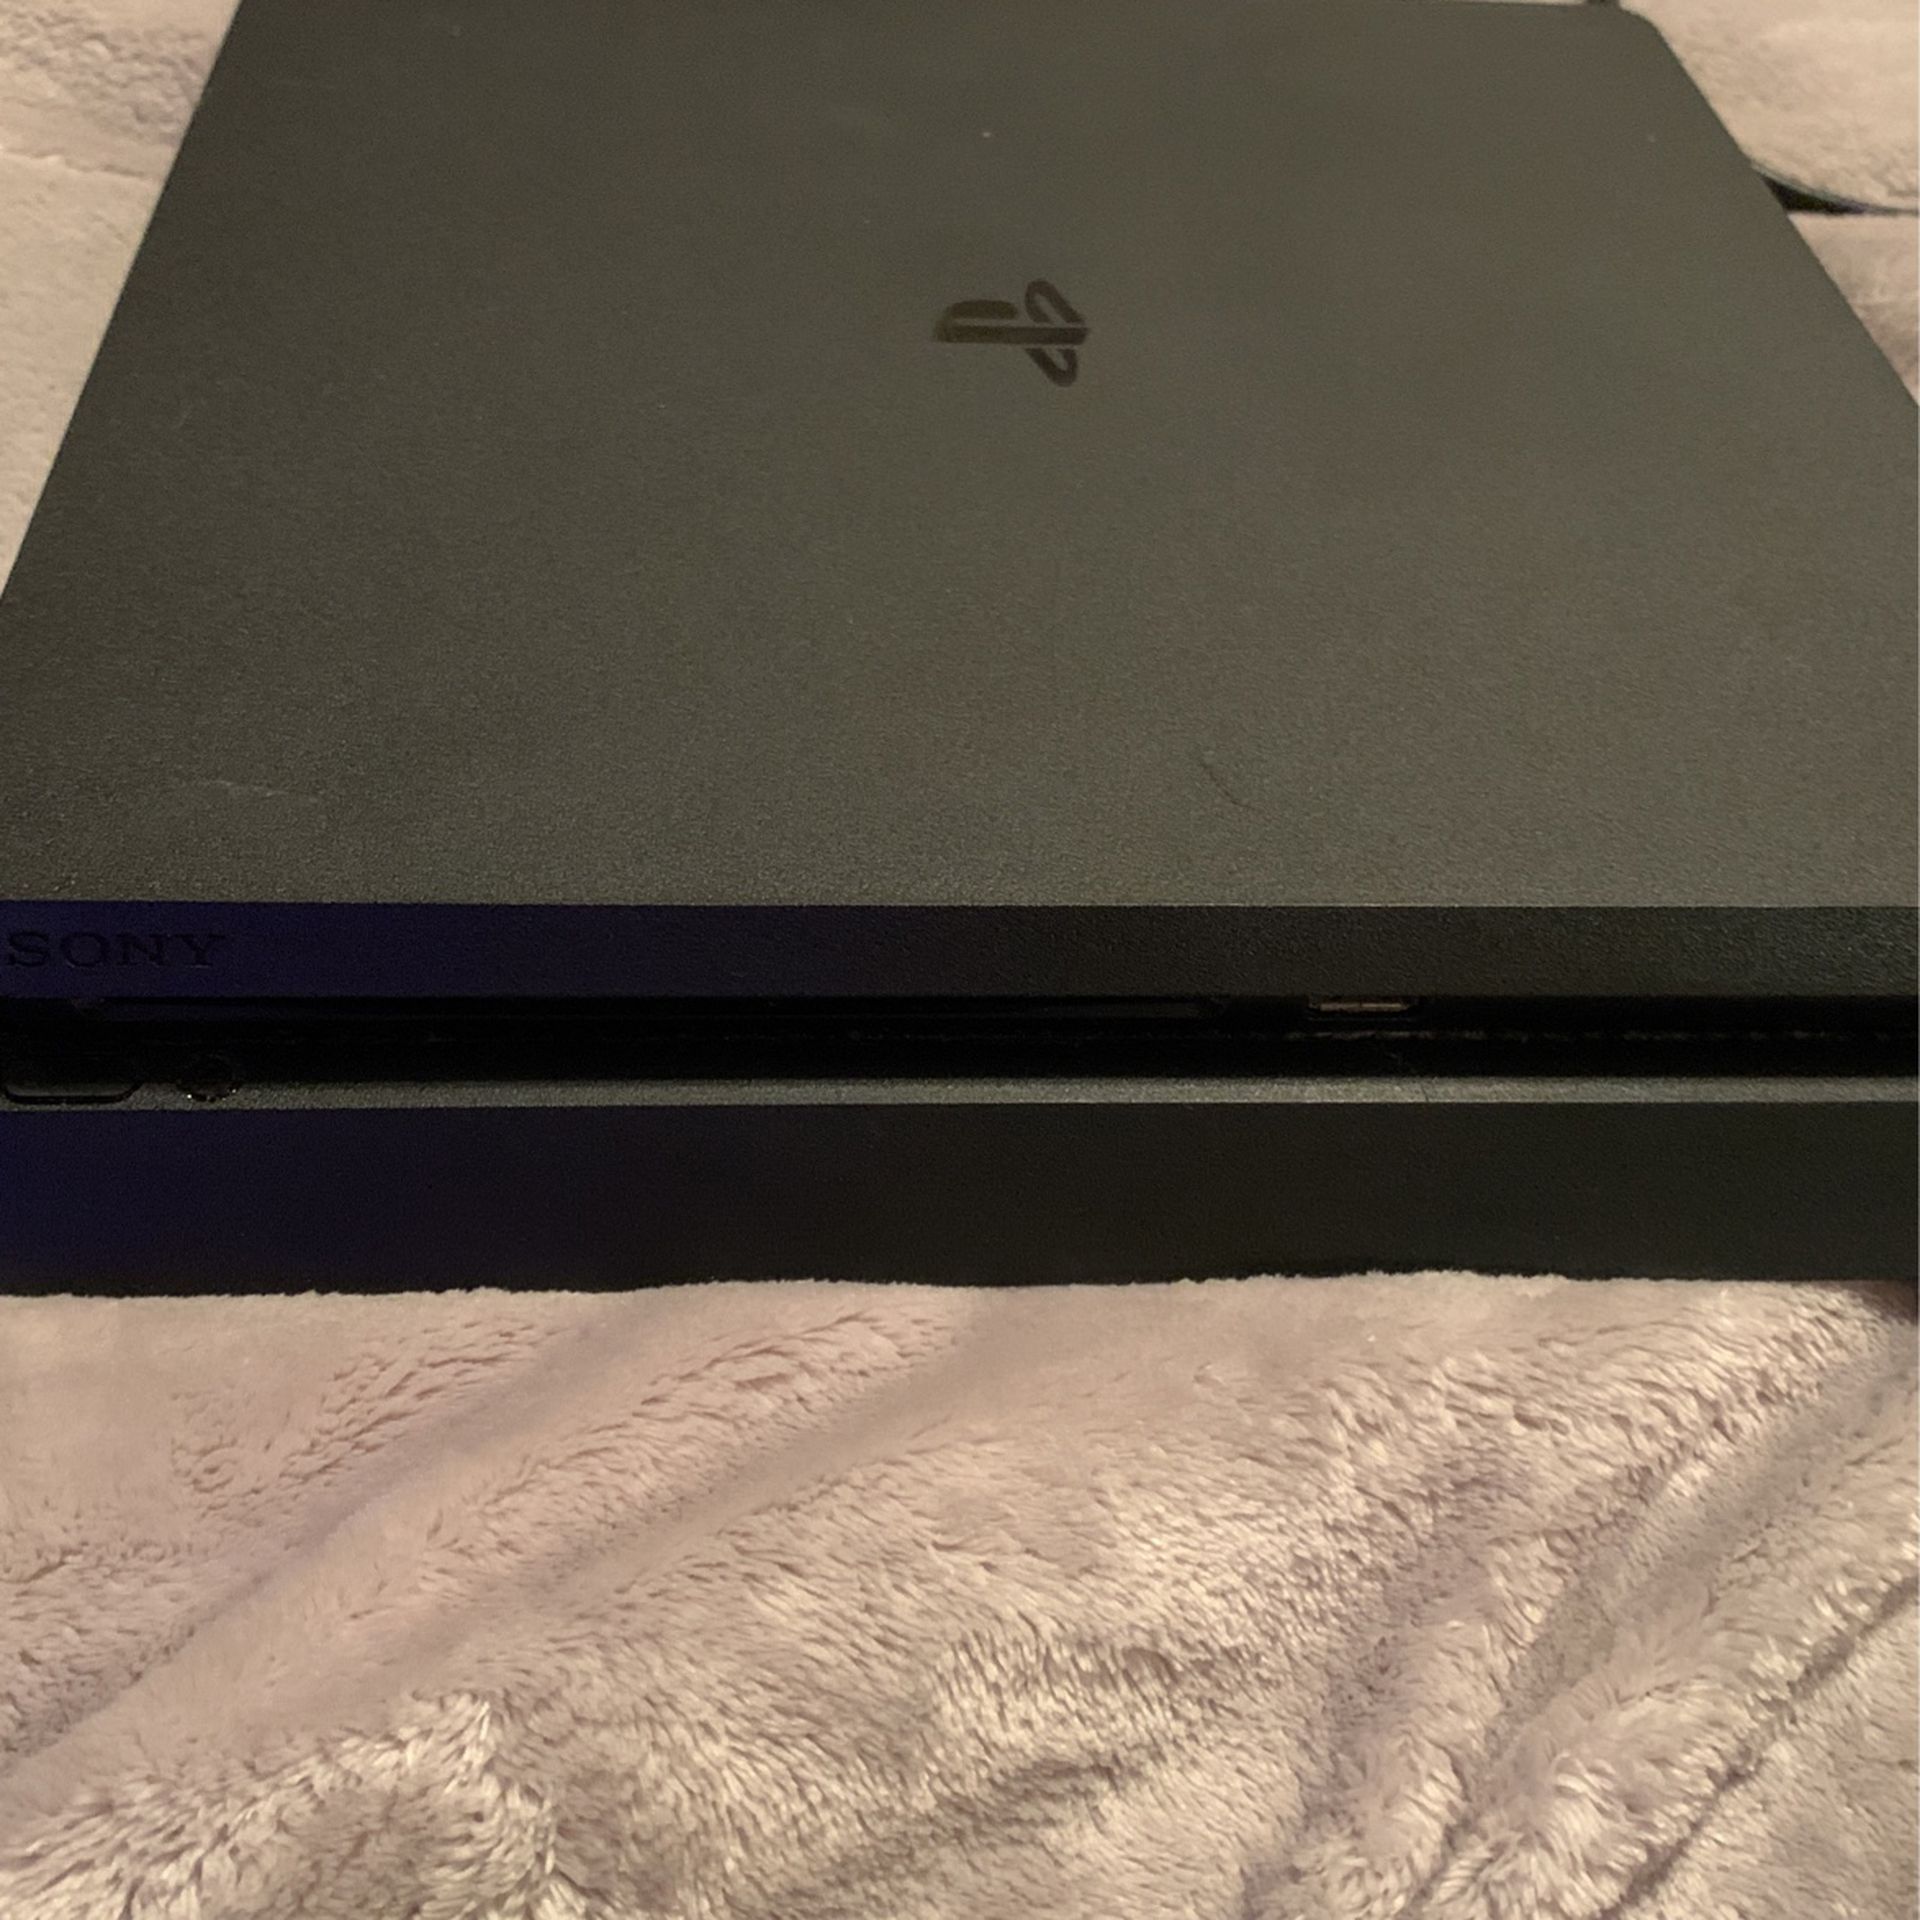 Ps4 for sell!! Bought it never used it/New